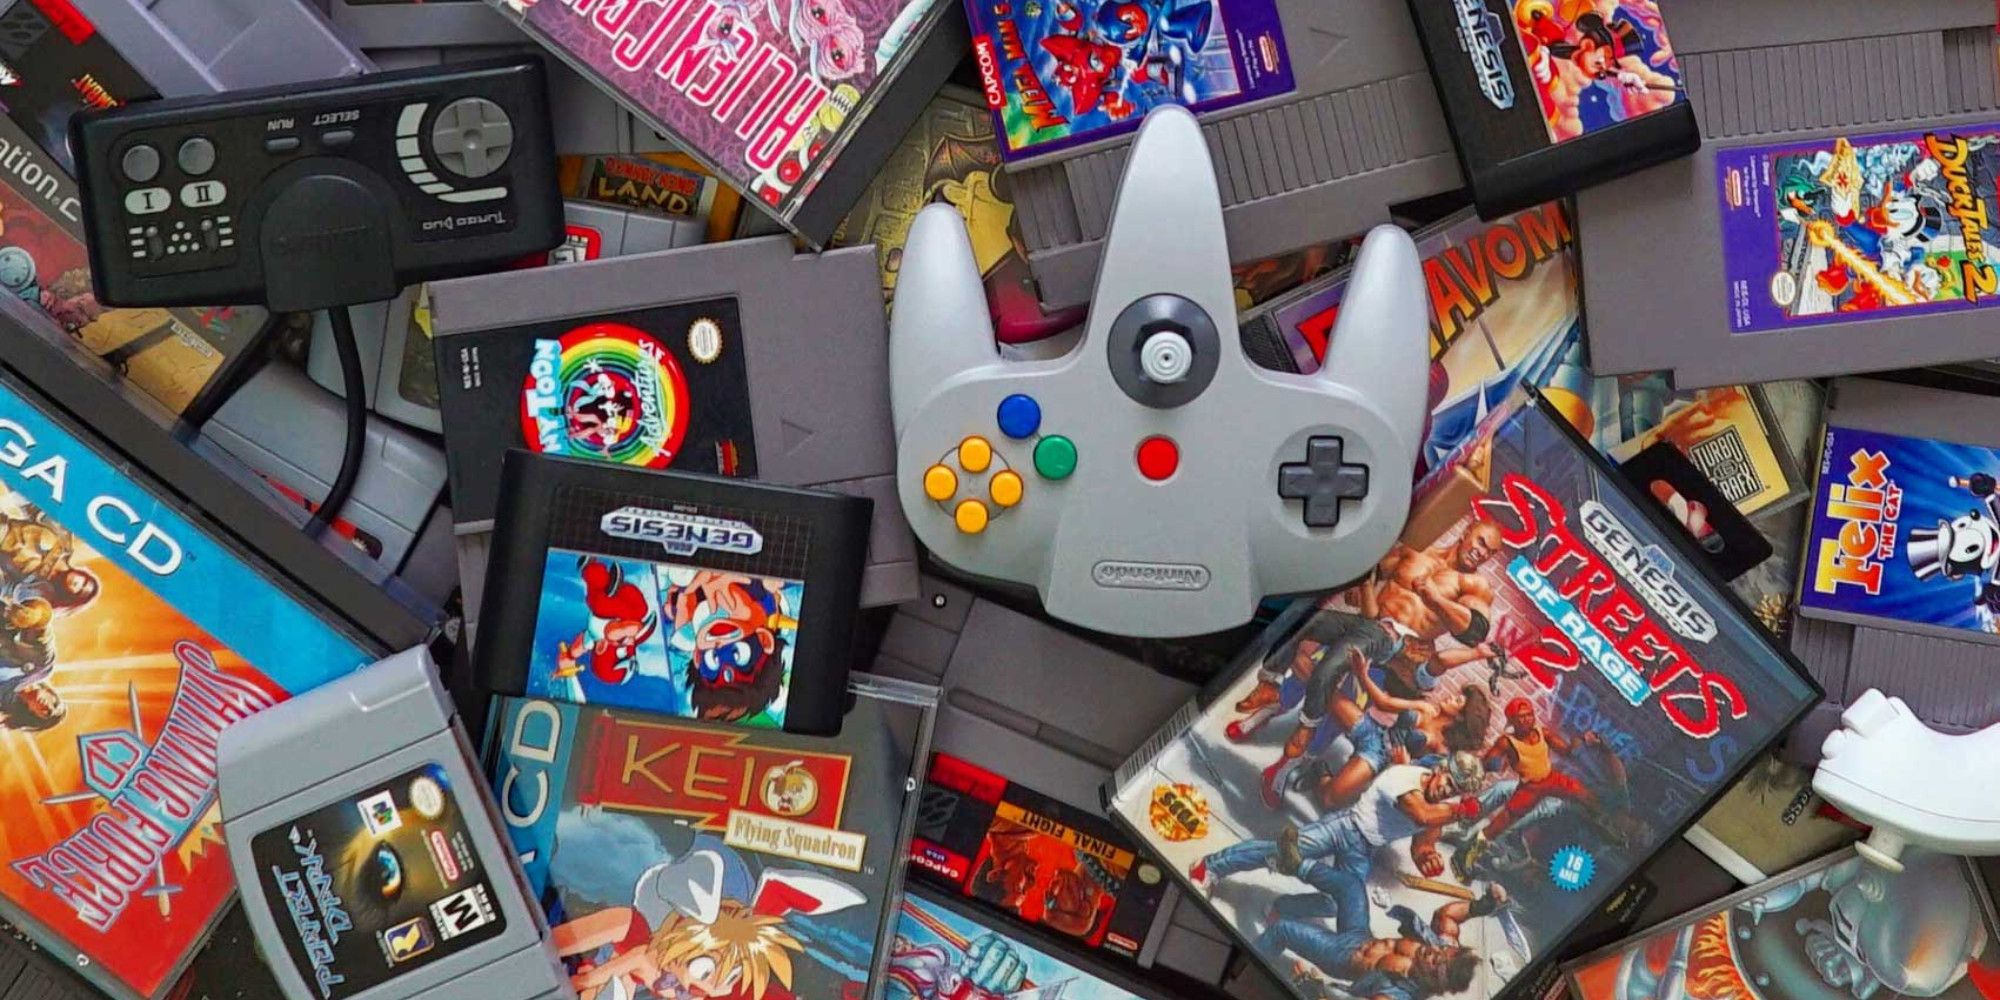 A collection of retro games and controllers